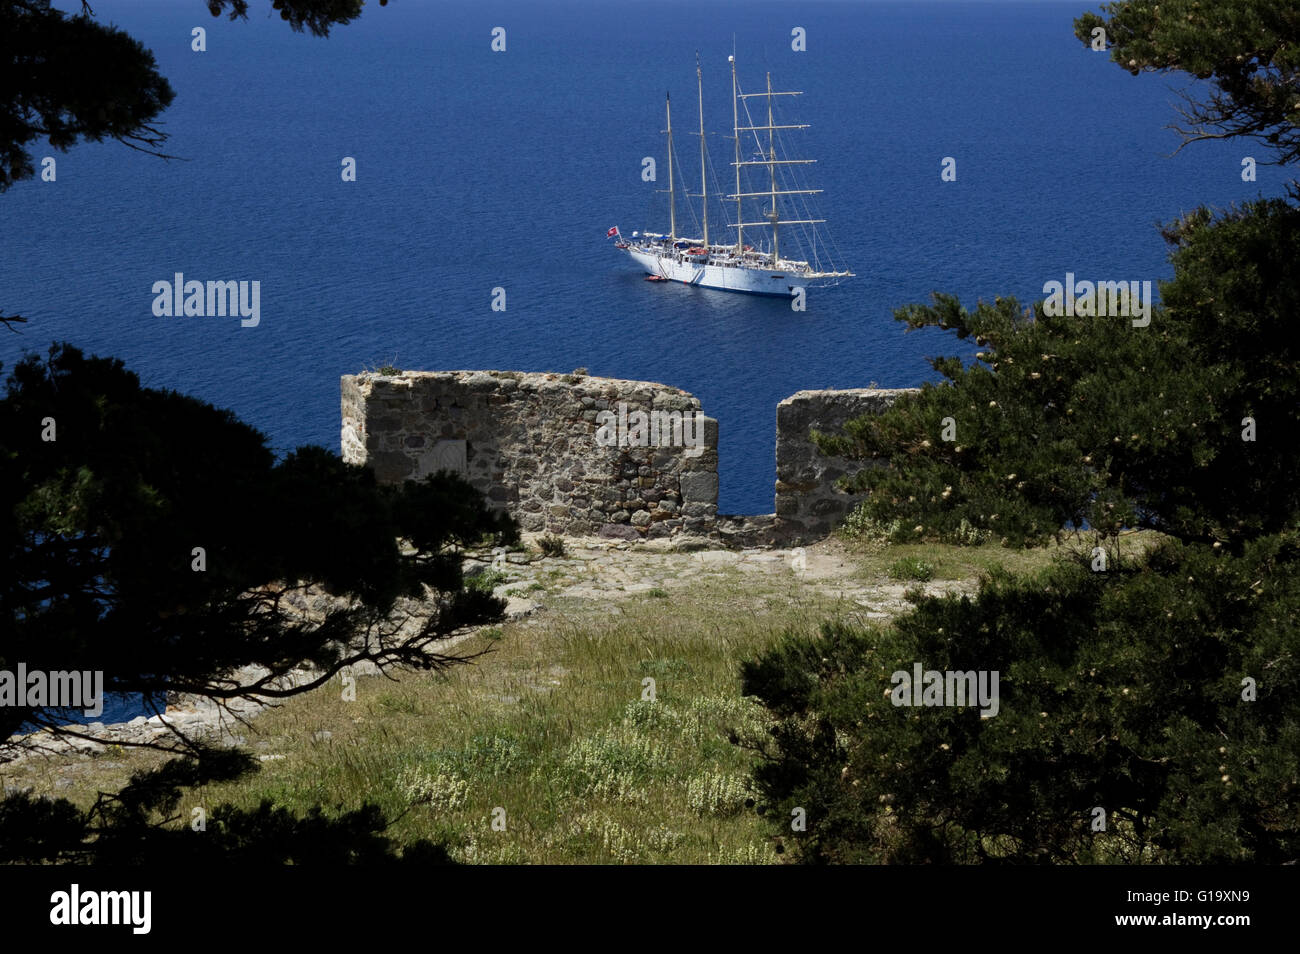 Luxurious Star Clipper ship sailing in the Aegean ocean, anchored outside Myrina's harbour. View from the castle. Limnos Greece Stock Photo